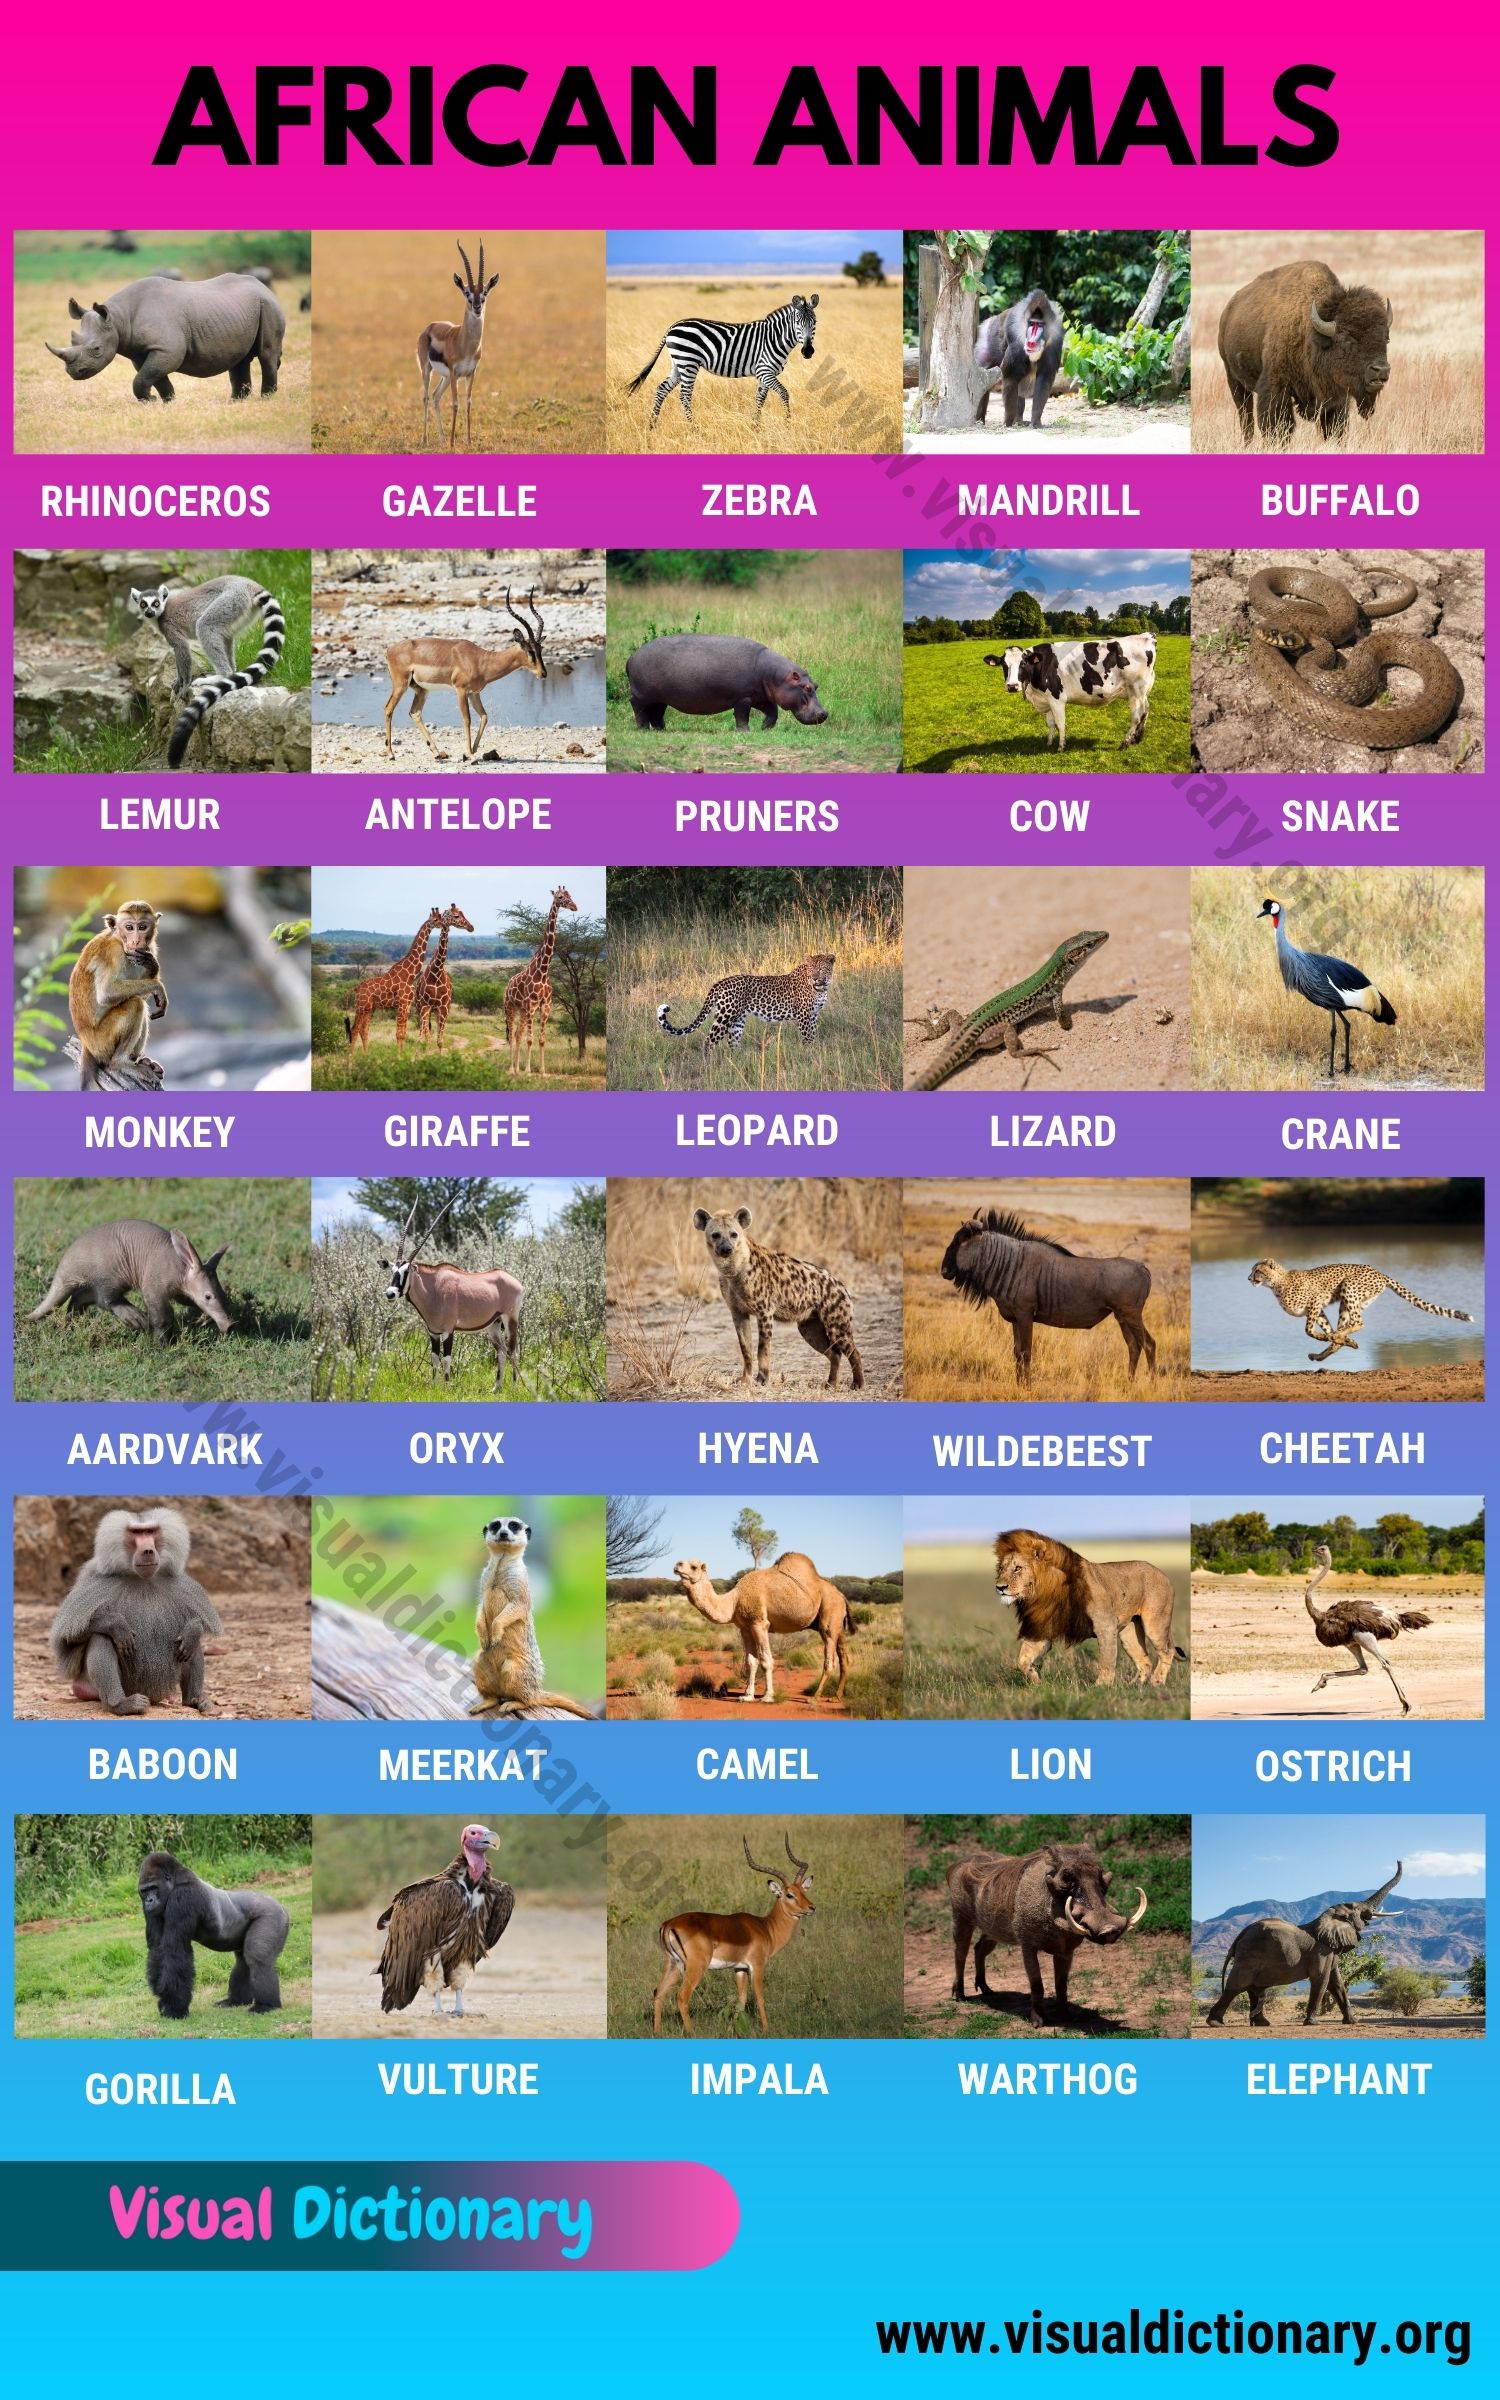 200+ Animals around the World with Beautiful Pictures - Visual Dictionary